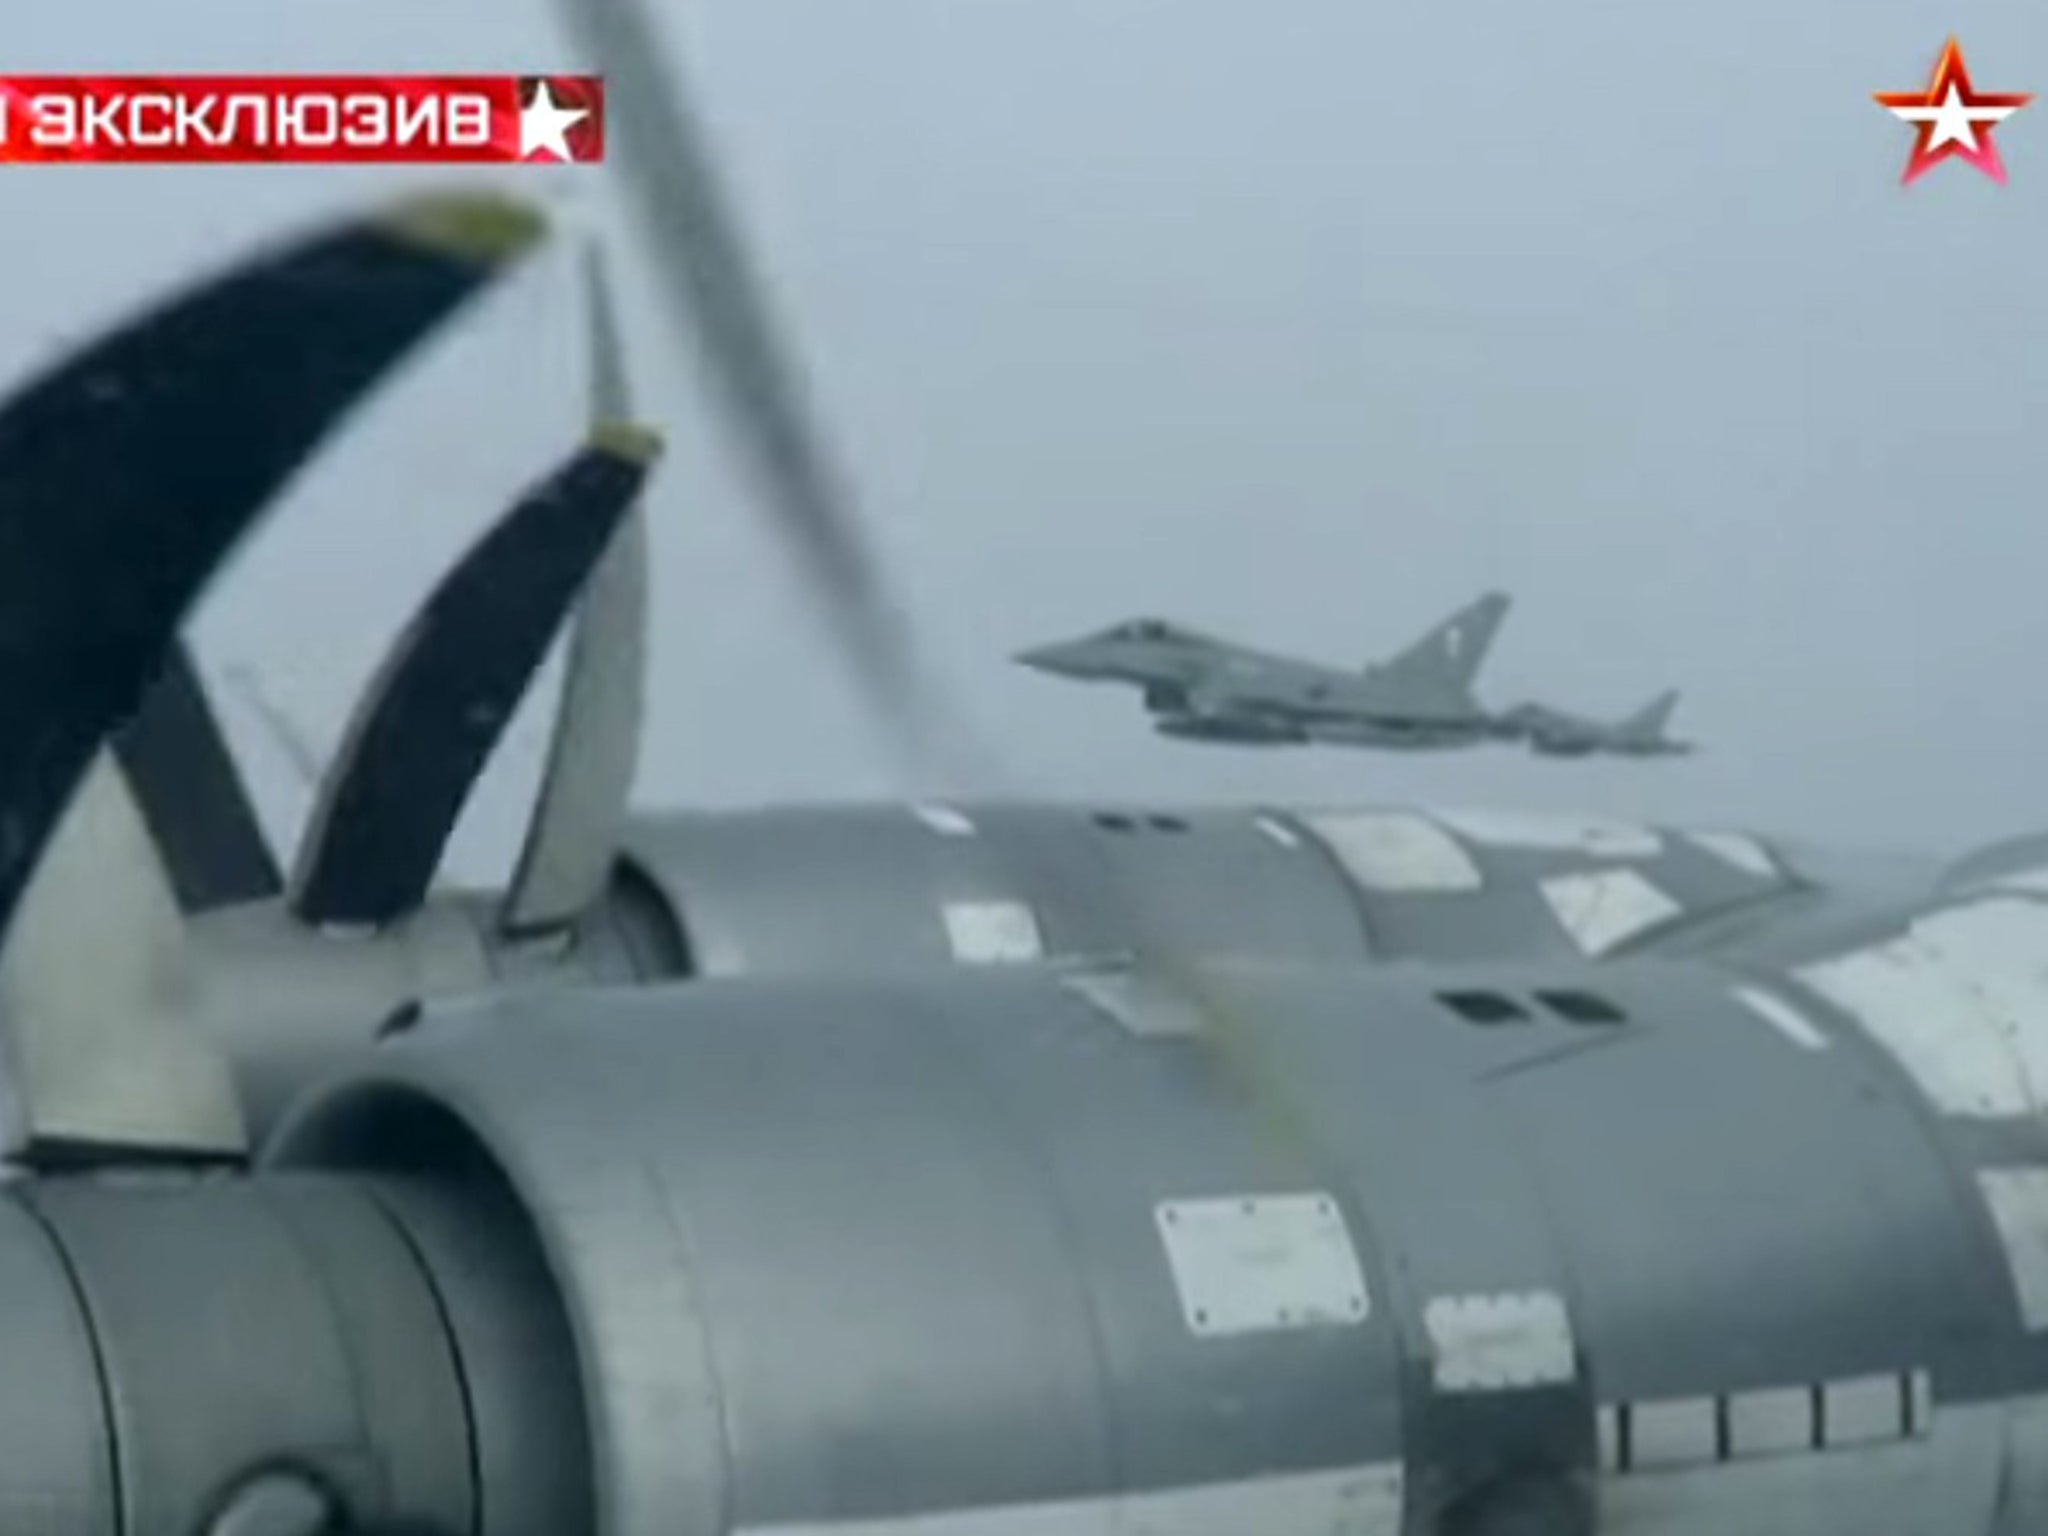 Footage released by the Russian Defence Ministry yesterday shows a Nato jet escorting a Tu-95 Bear bomber of the kind involved in Wednesday’s incident